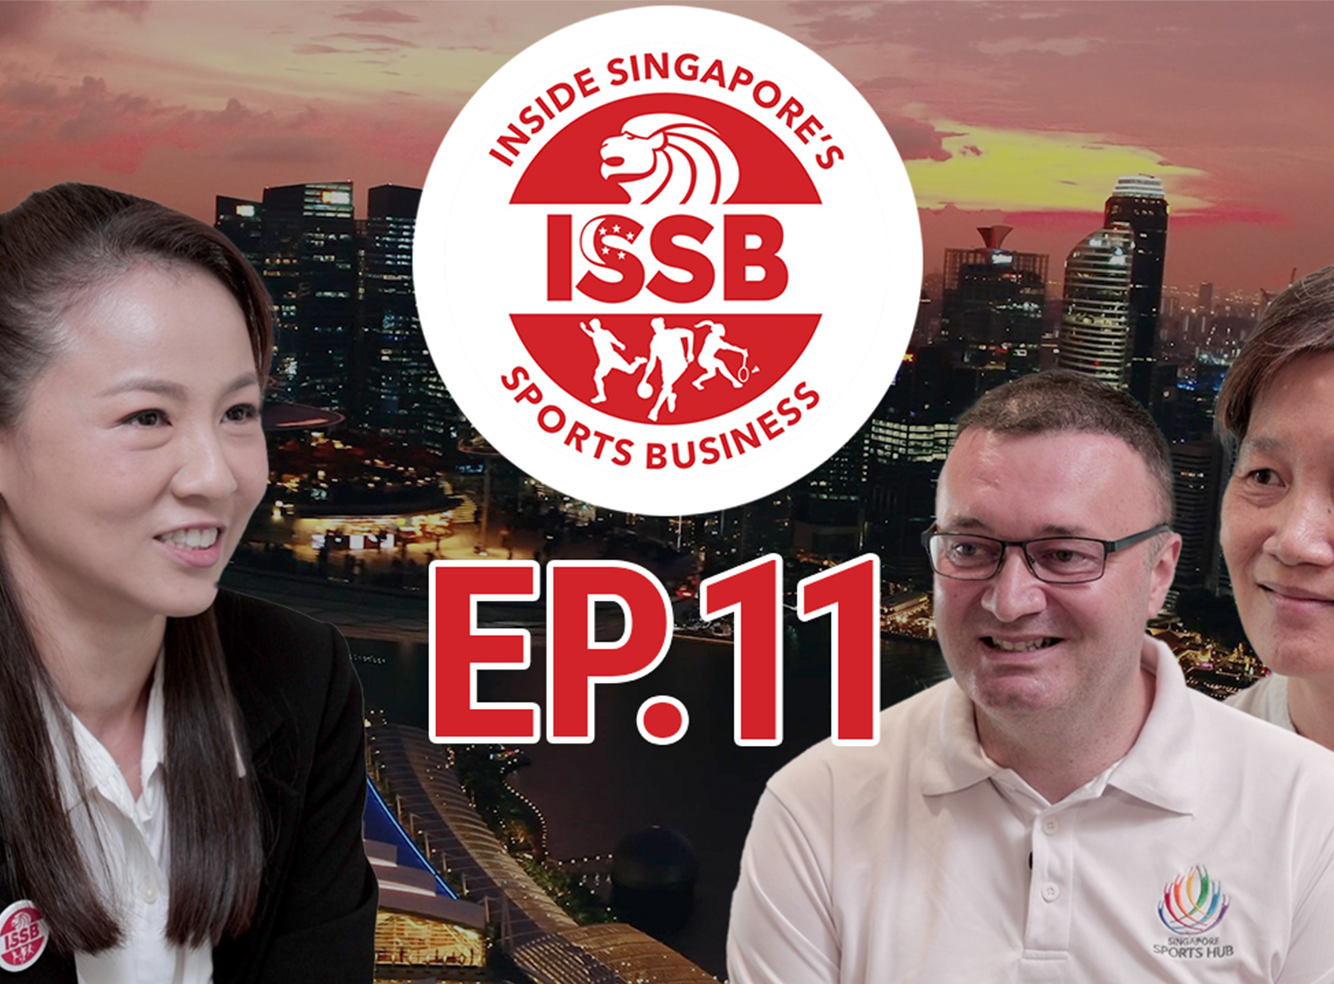 Ep 11 - Sports Events - Mass Spectator Events at SportsHub